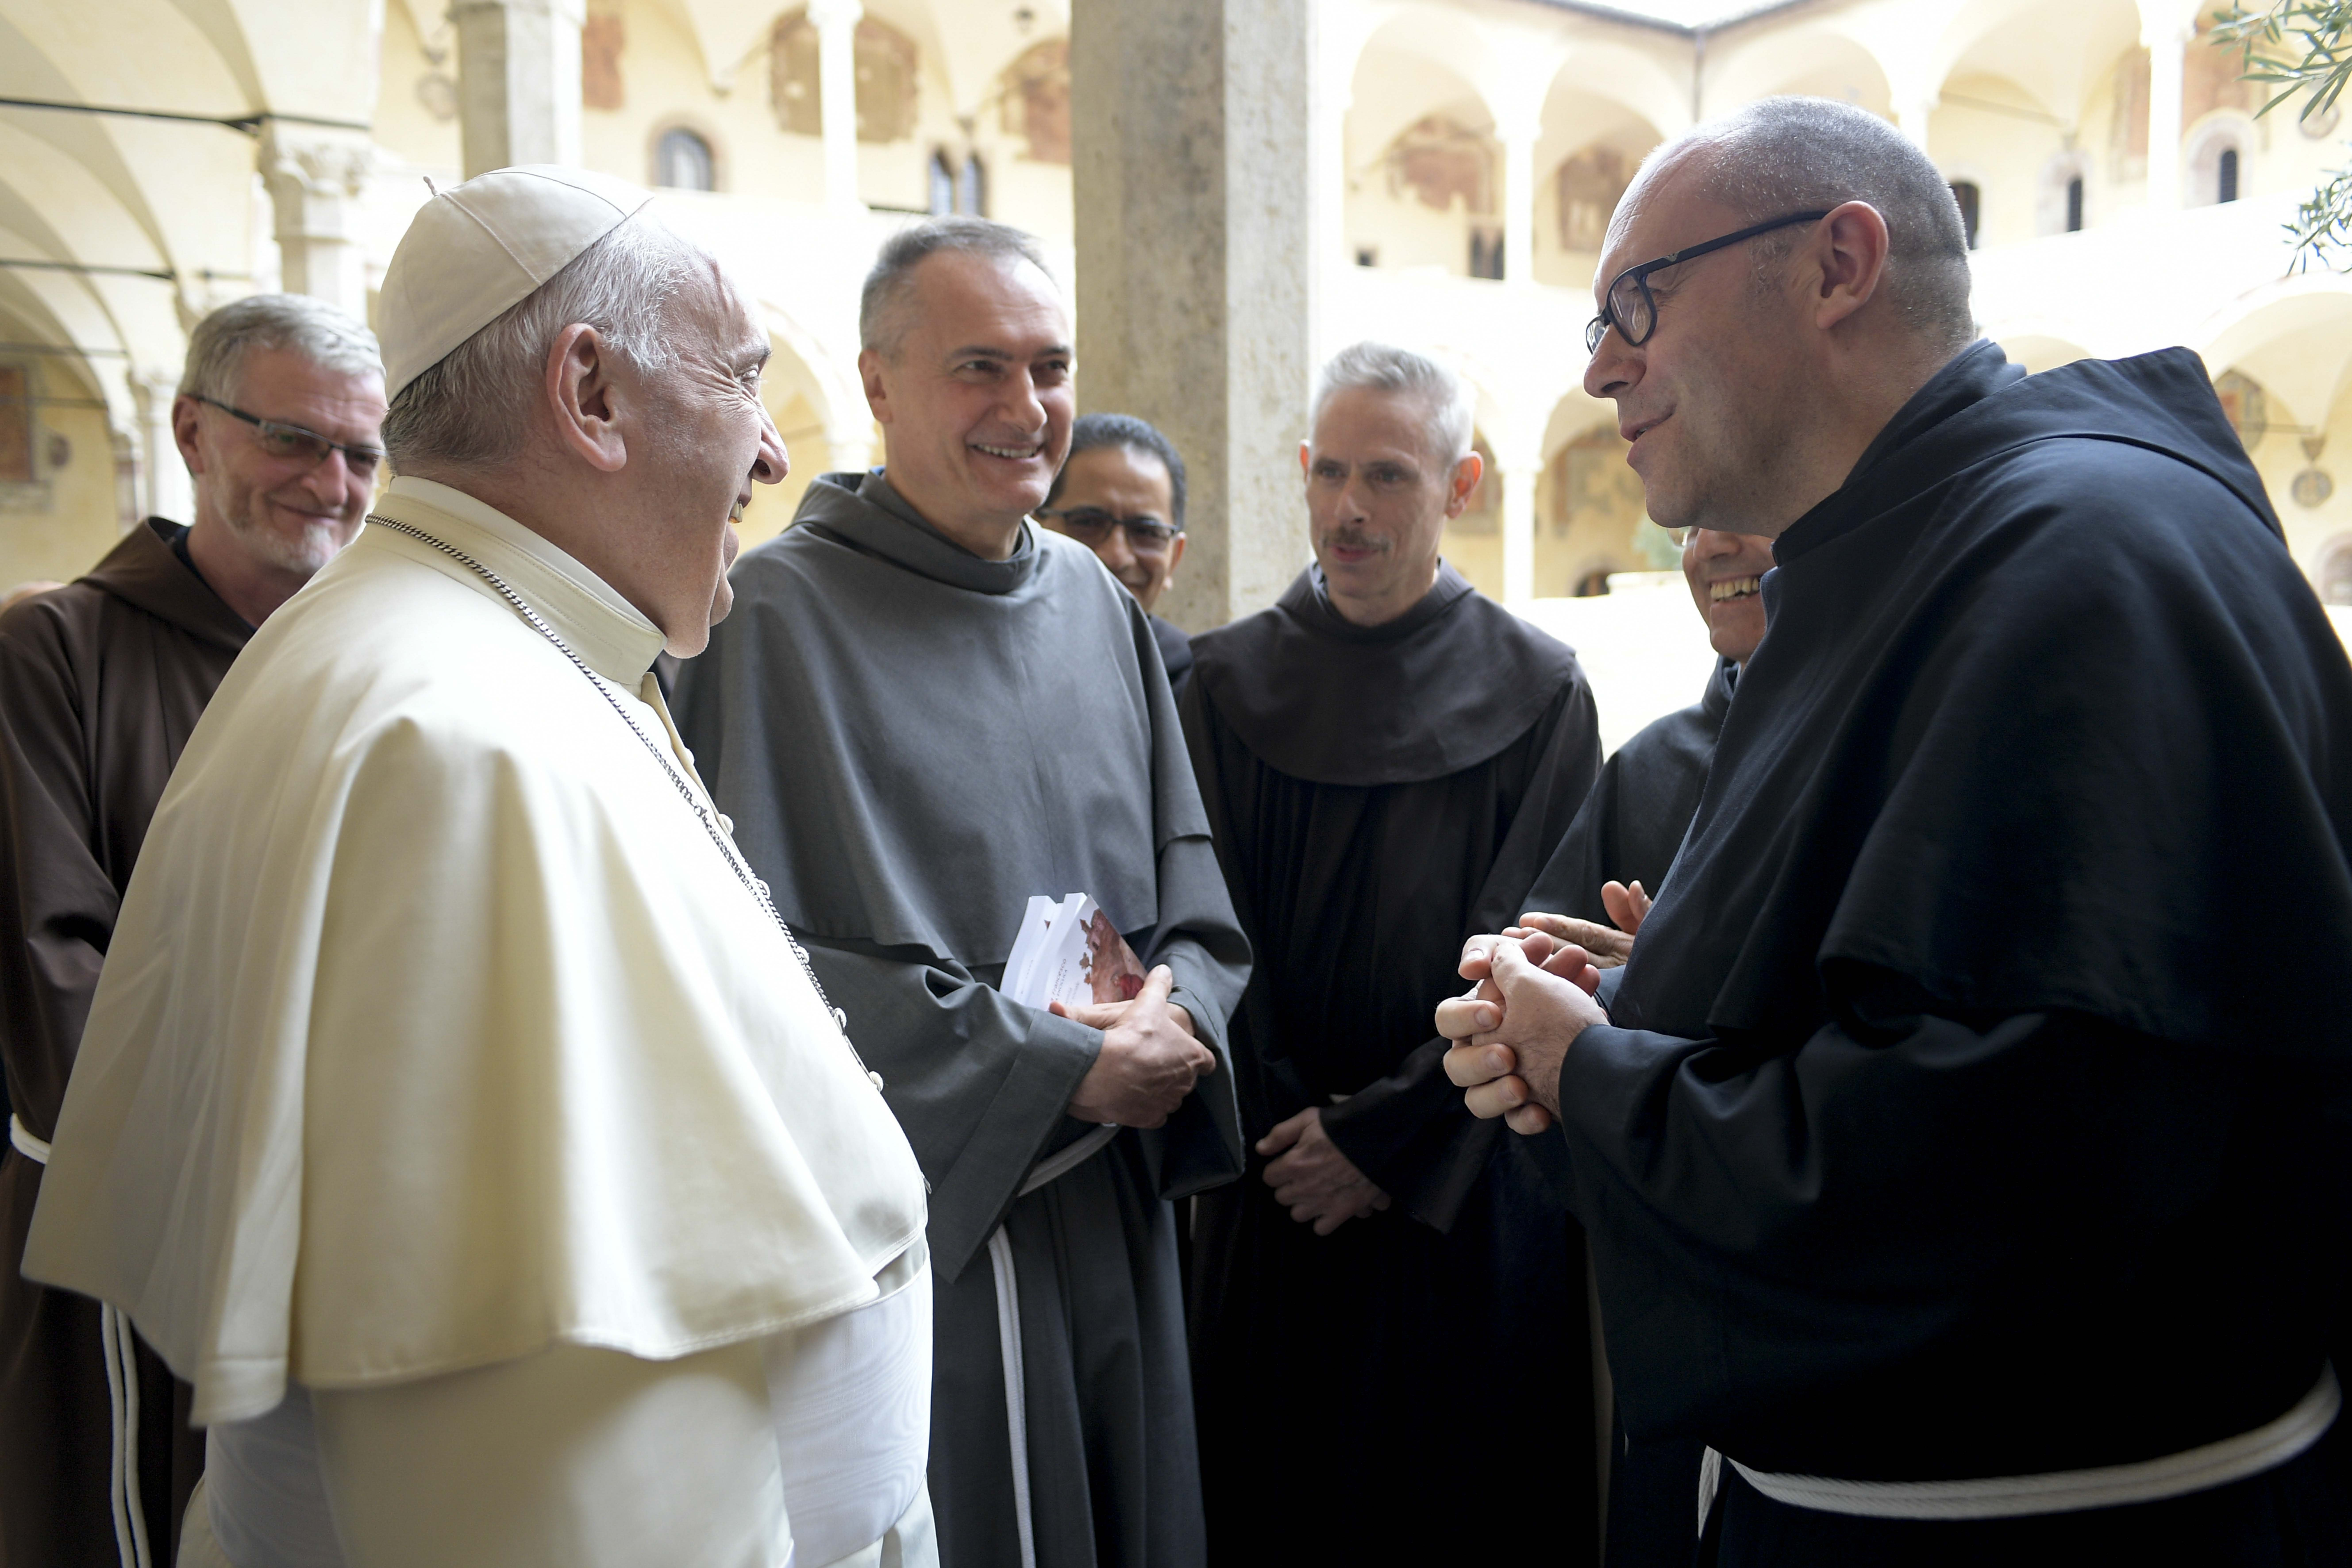 Pope Francis talks with leaders of Franciscan orders at the Basilica of St. Francis in Assisi, Italy, Oct. 3, 2020. The pope celebrated Mass and signed his new encyclical, 